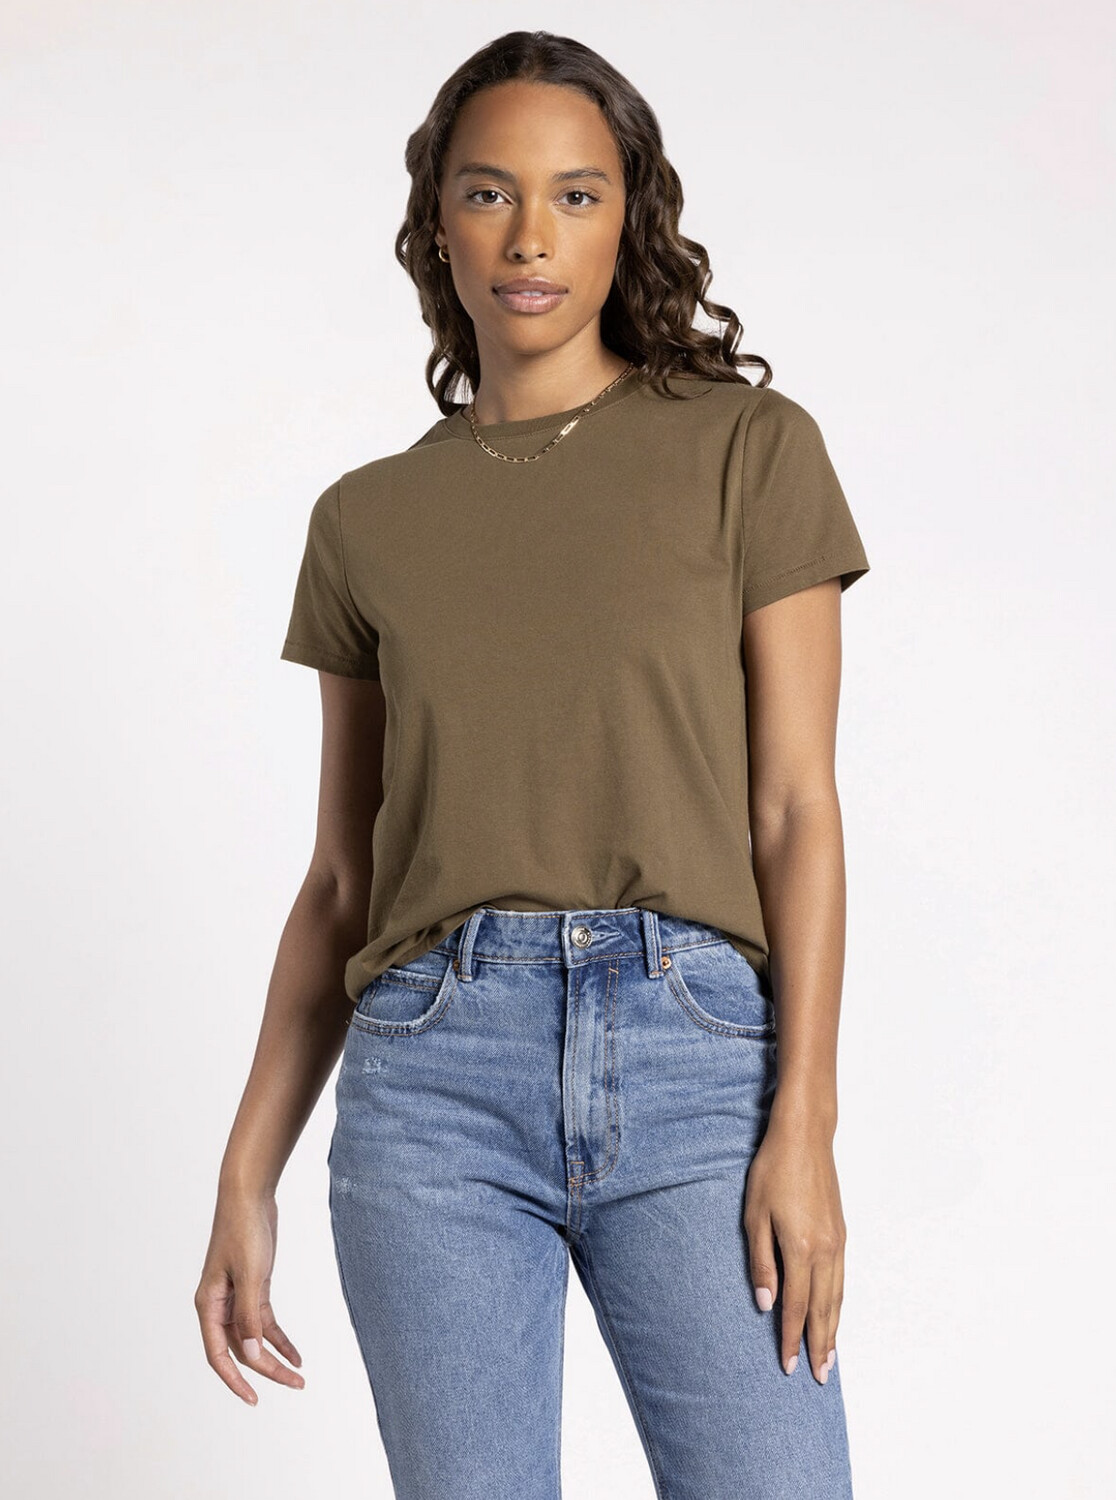 Asher Tee, Colour: Dark Olive, Size: Small